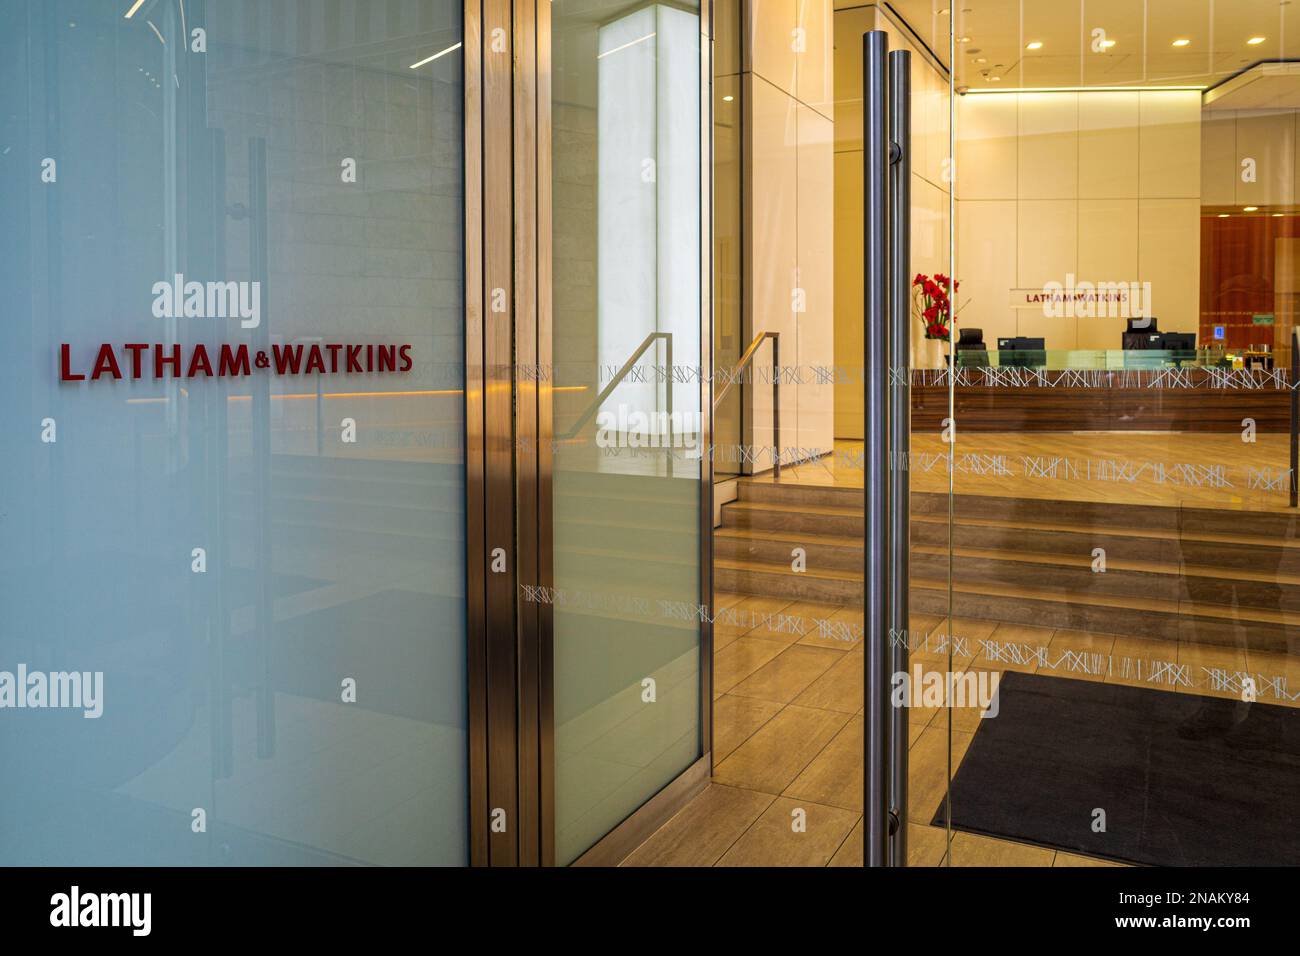 Latham & Watkins LLP London - Entrance to the Latham and Watkins Law Firm in the City of London Financial District. Stock Photo